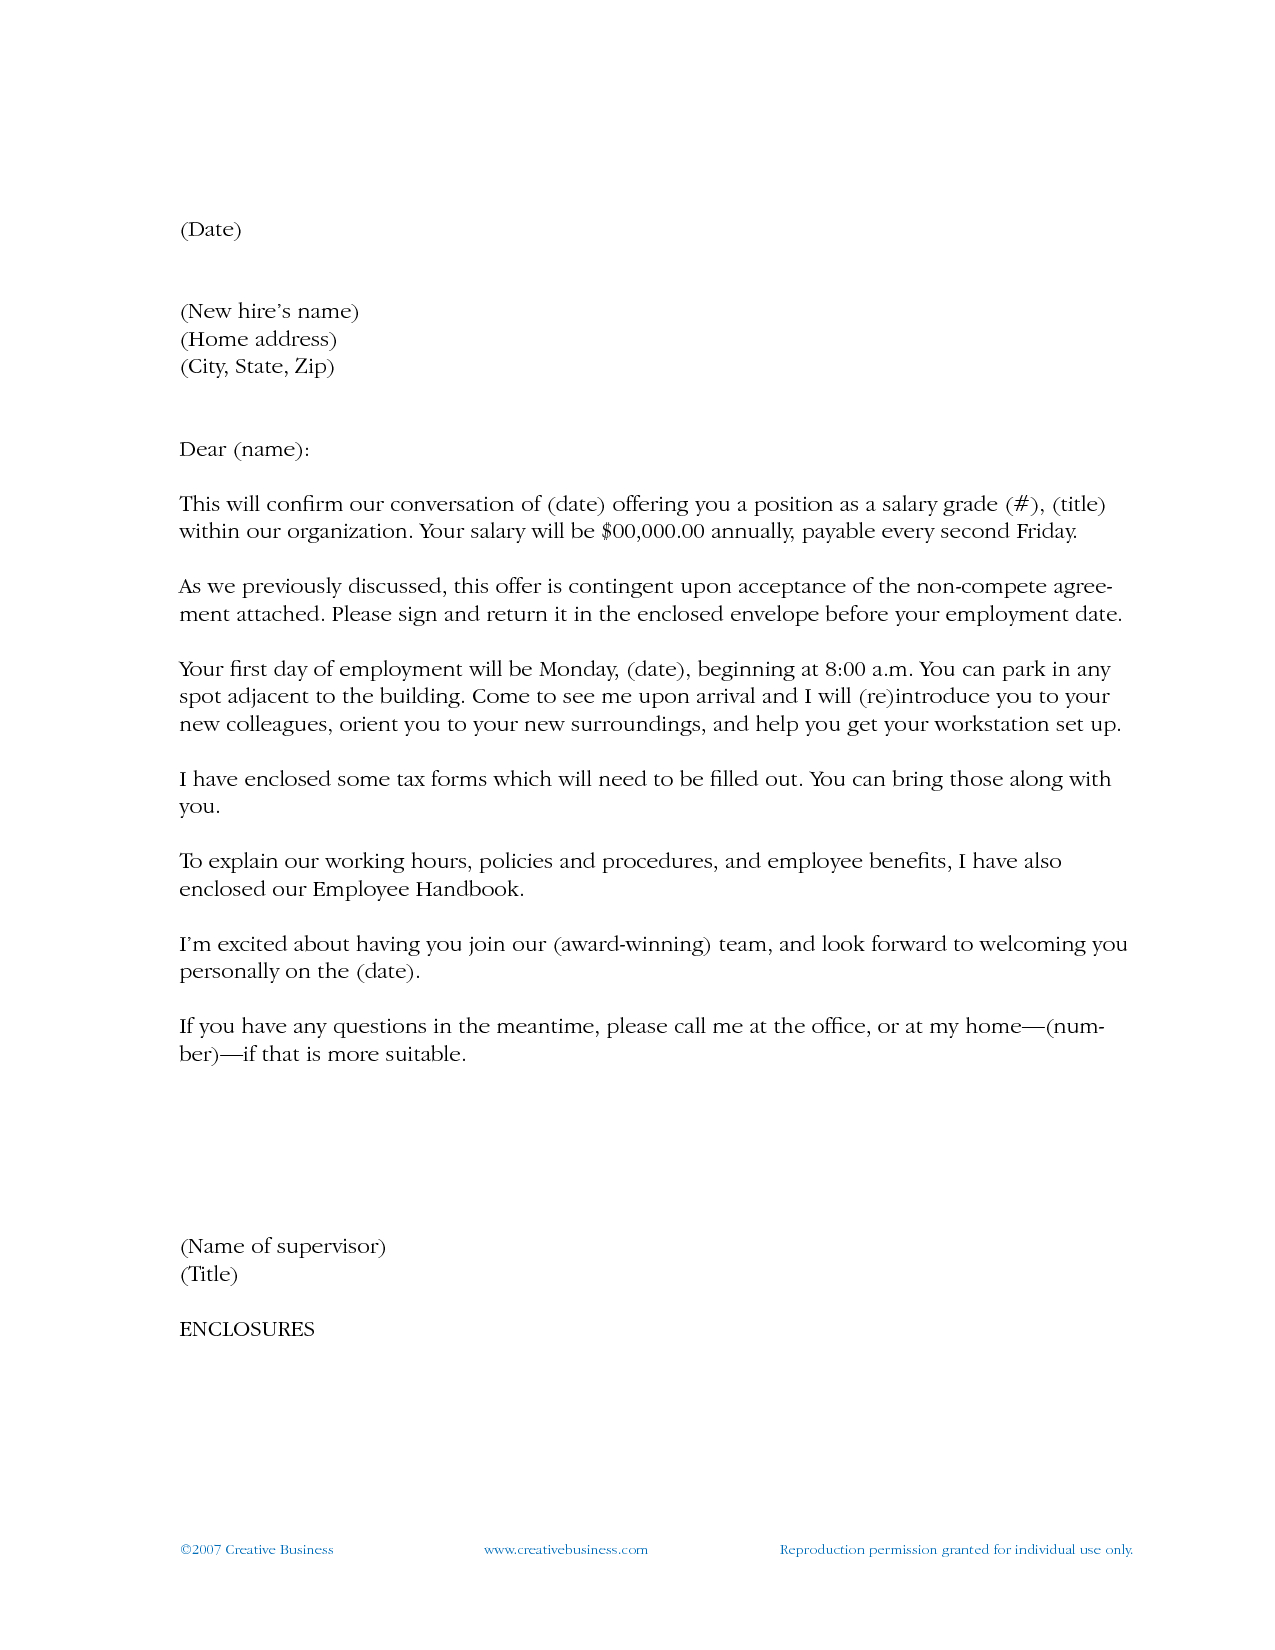 New Hire Welcome Letter Template - How to Write A Wel E Letter to A New Employee Letter